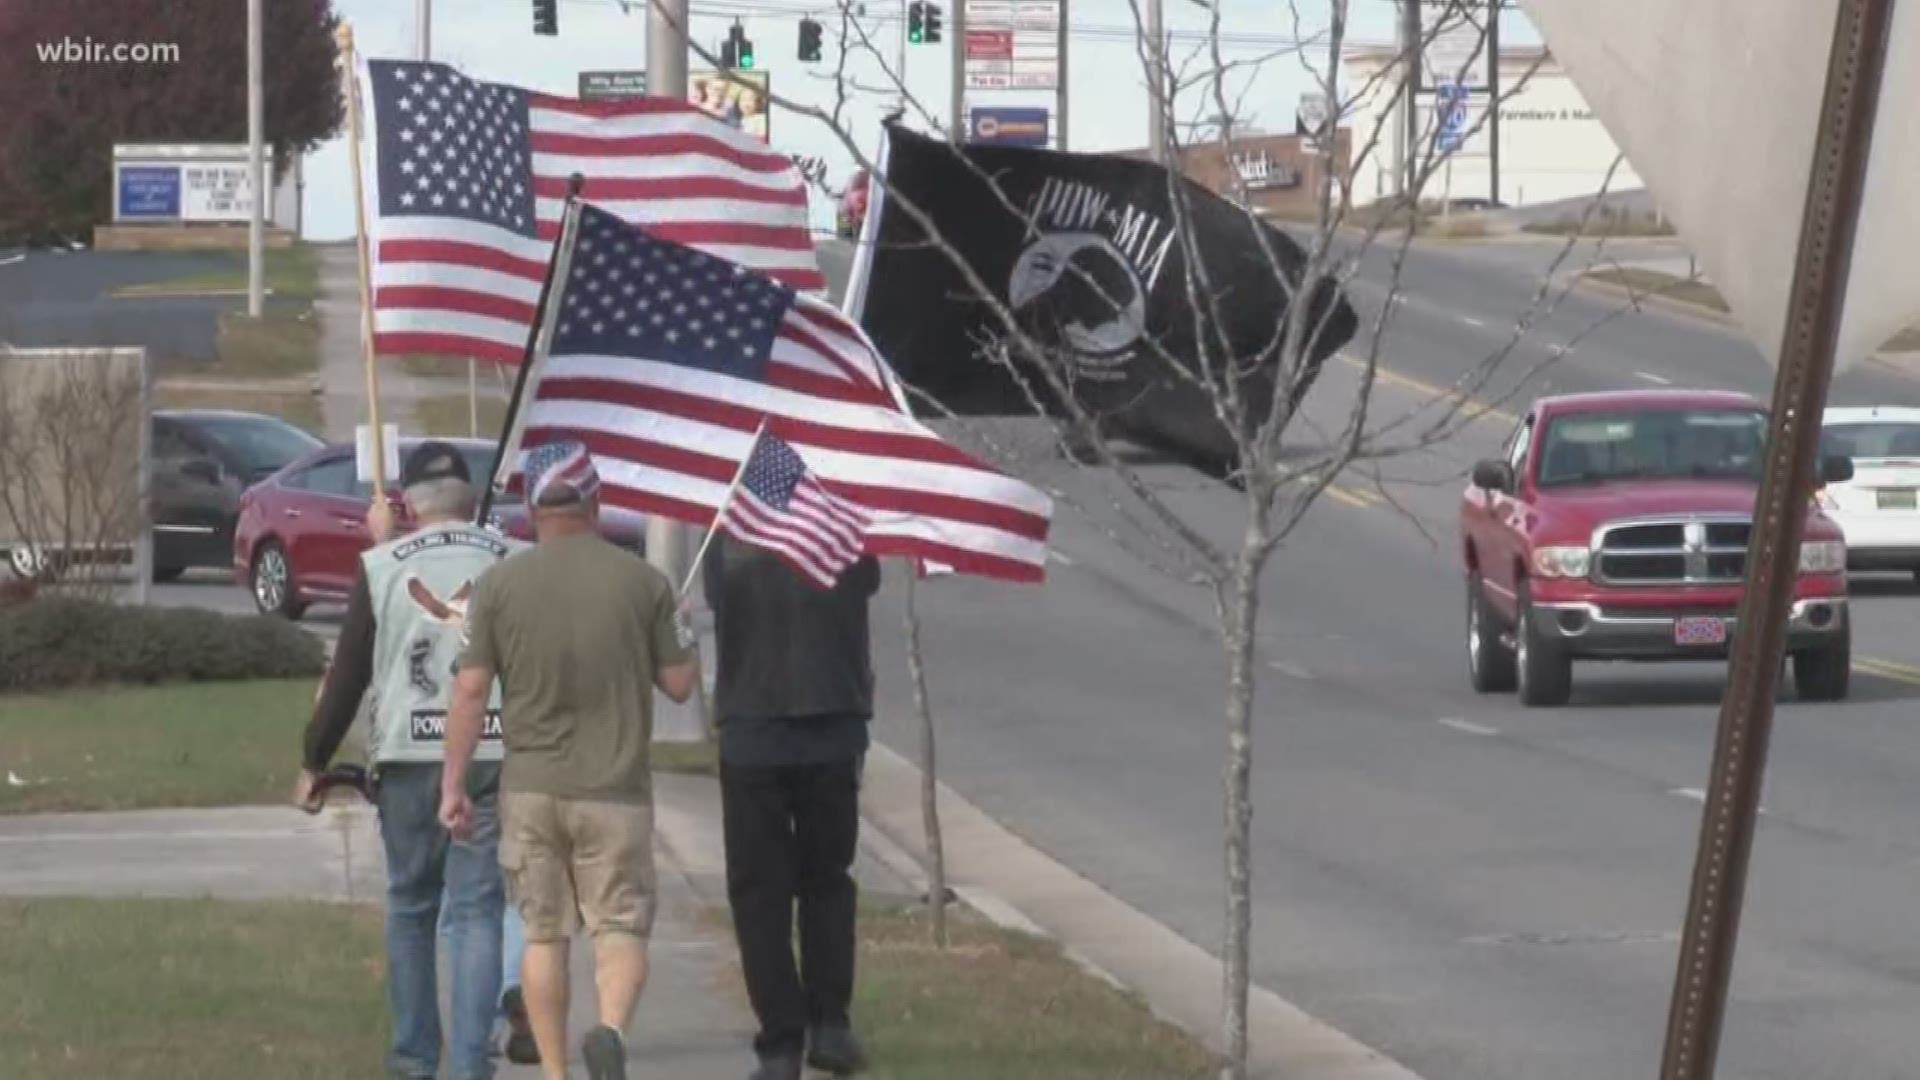 A Crossville man is honoring his fellow veterans one step at a time by hoisting his American Flag with pride on his daily walks to honor the fallen.